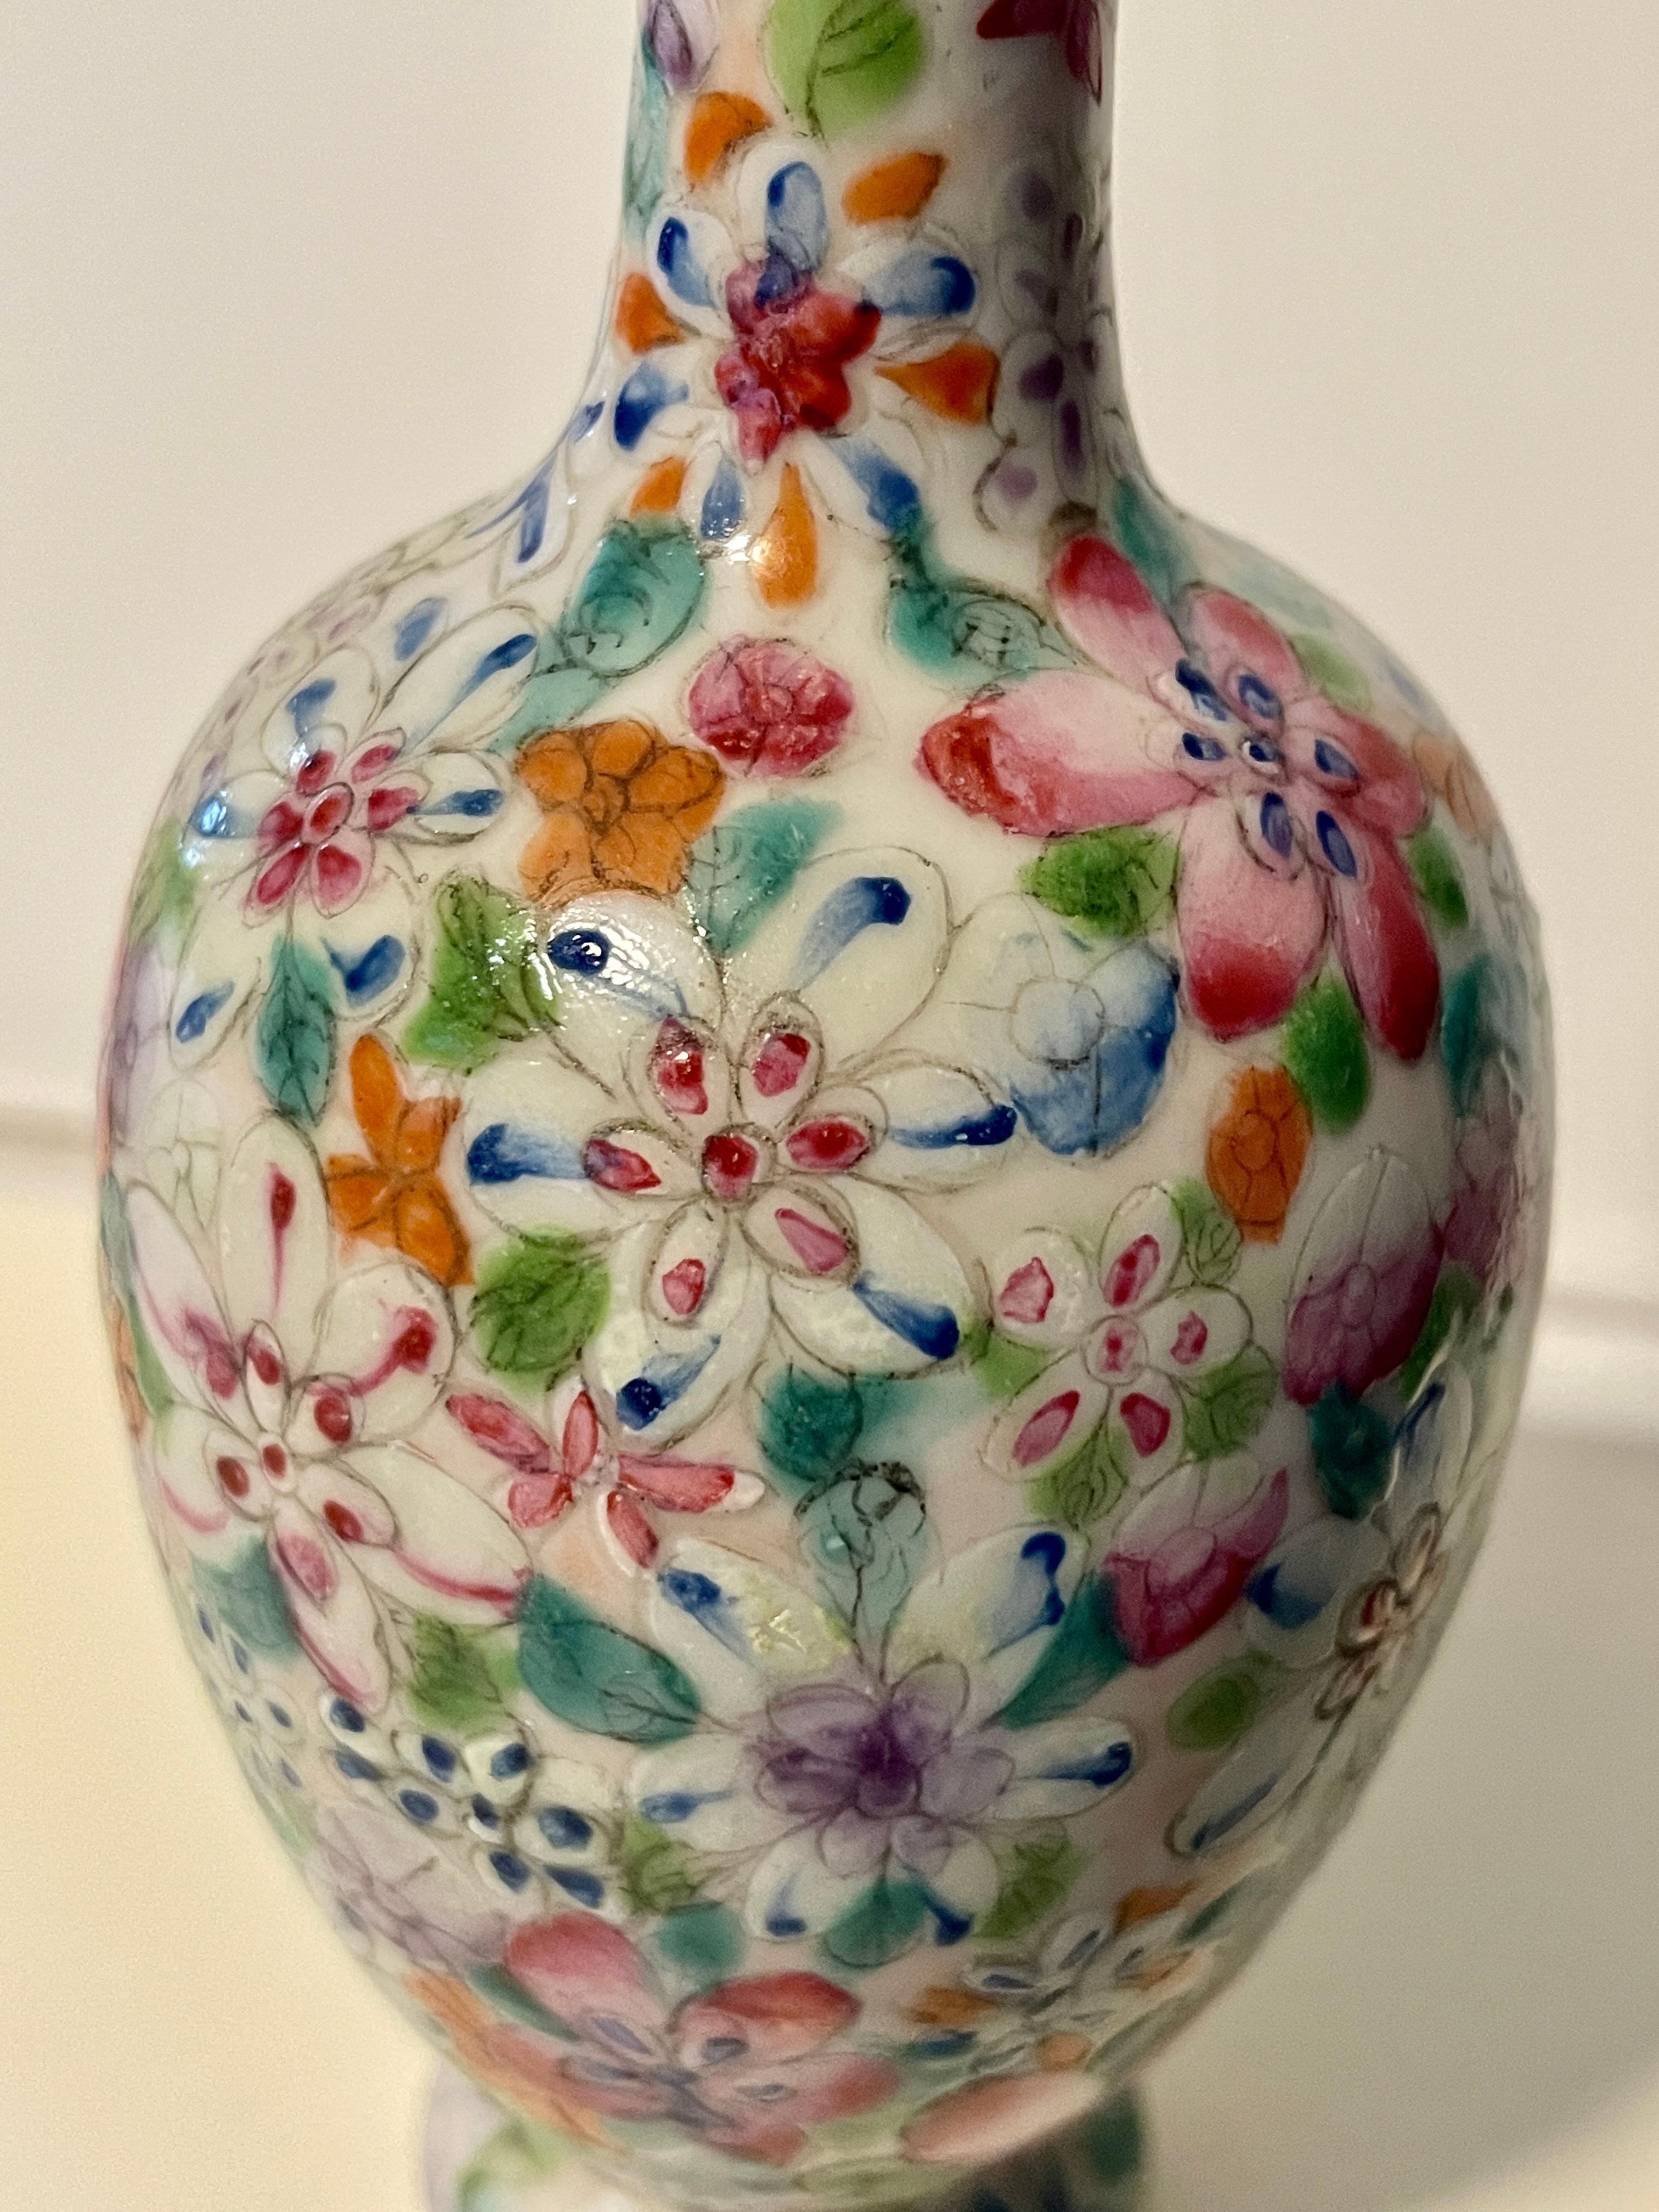 Lovely Chinese Famille Rose Millefleurs porcelain vase. Late Qing Dynasty to Republican Period. Baluster form with all over polychrome enamel floral decoration. Unmarked. From a California collection.